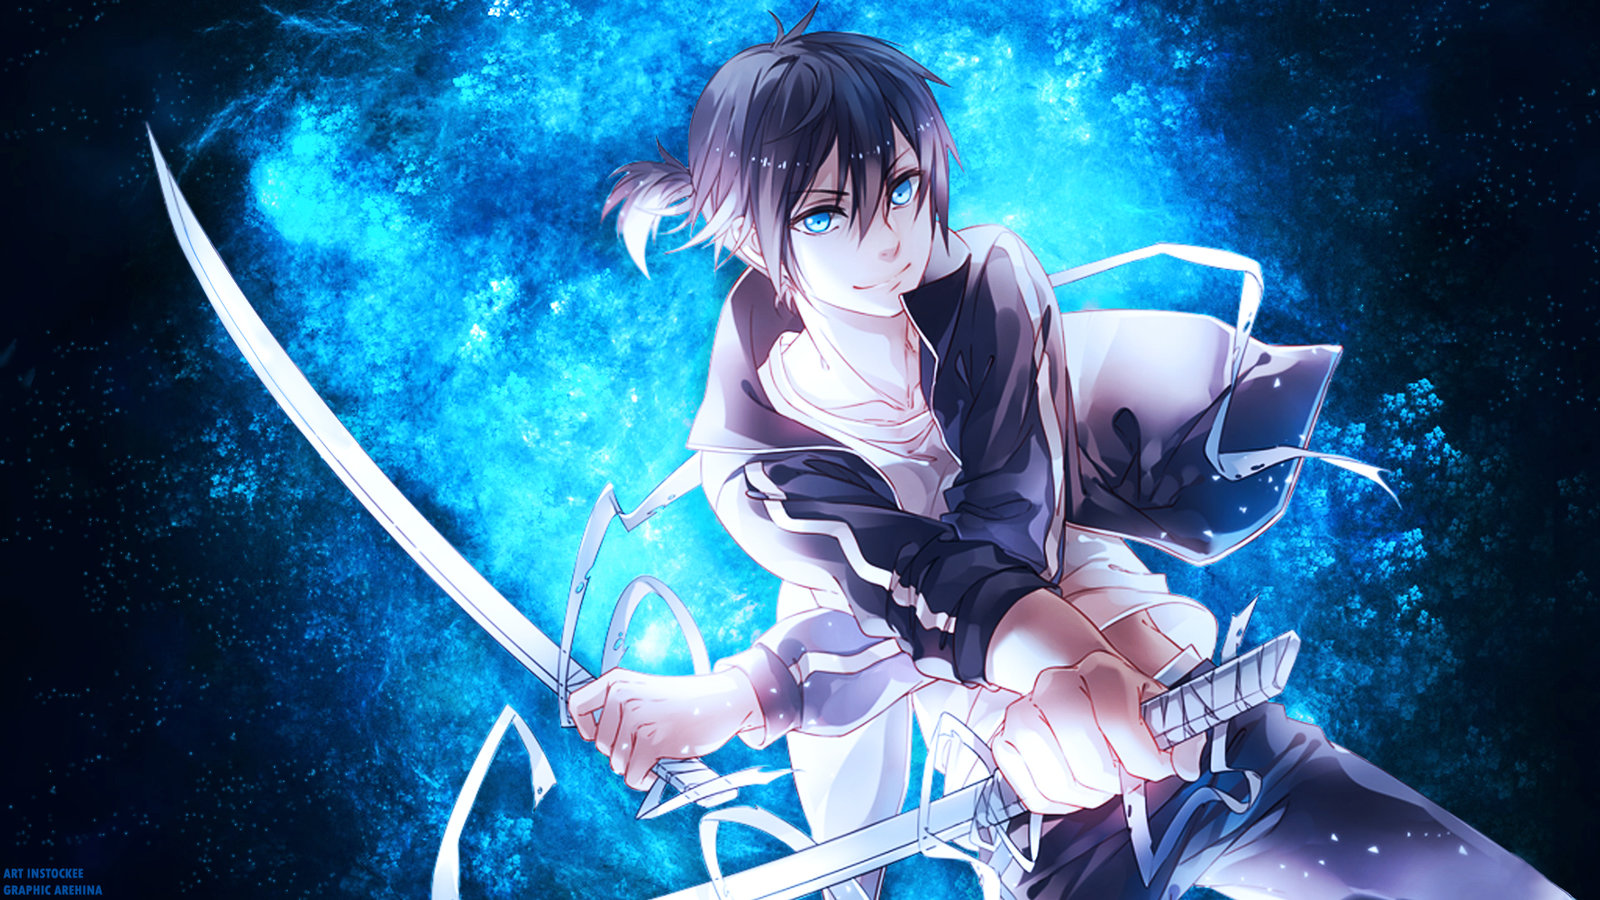 Free Download Noragami Yato Wallpaper By Are X For Your Desktop Mobile Tablet